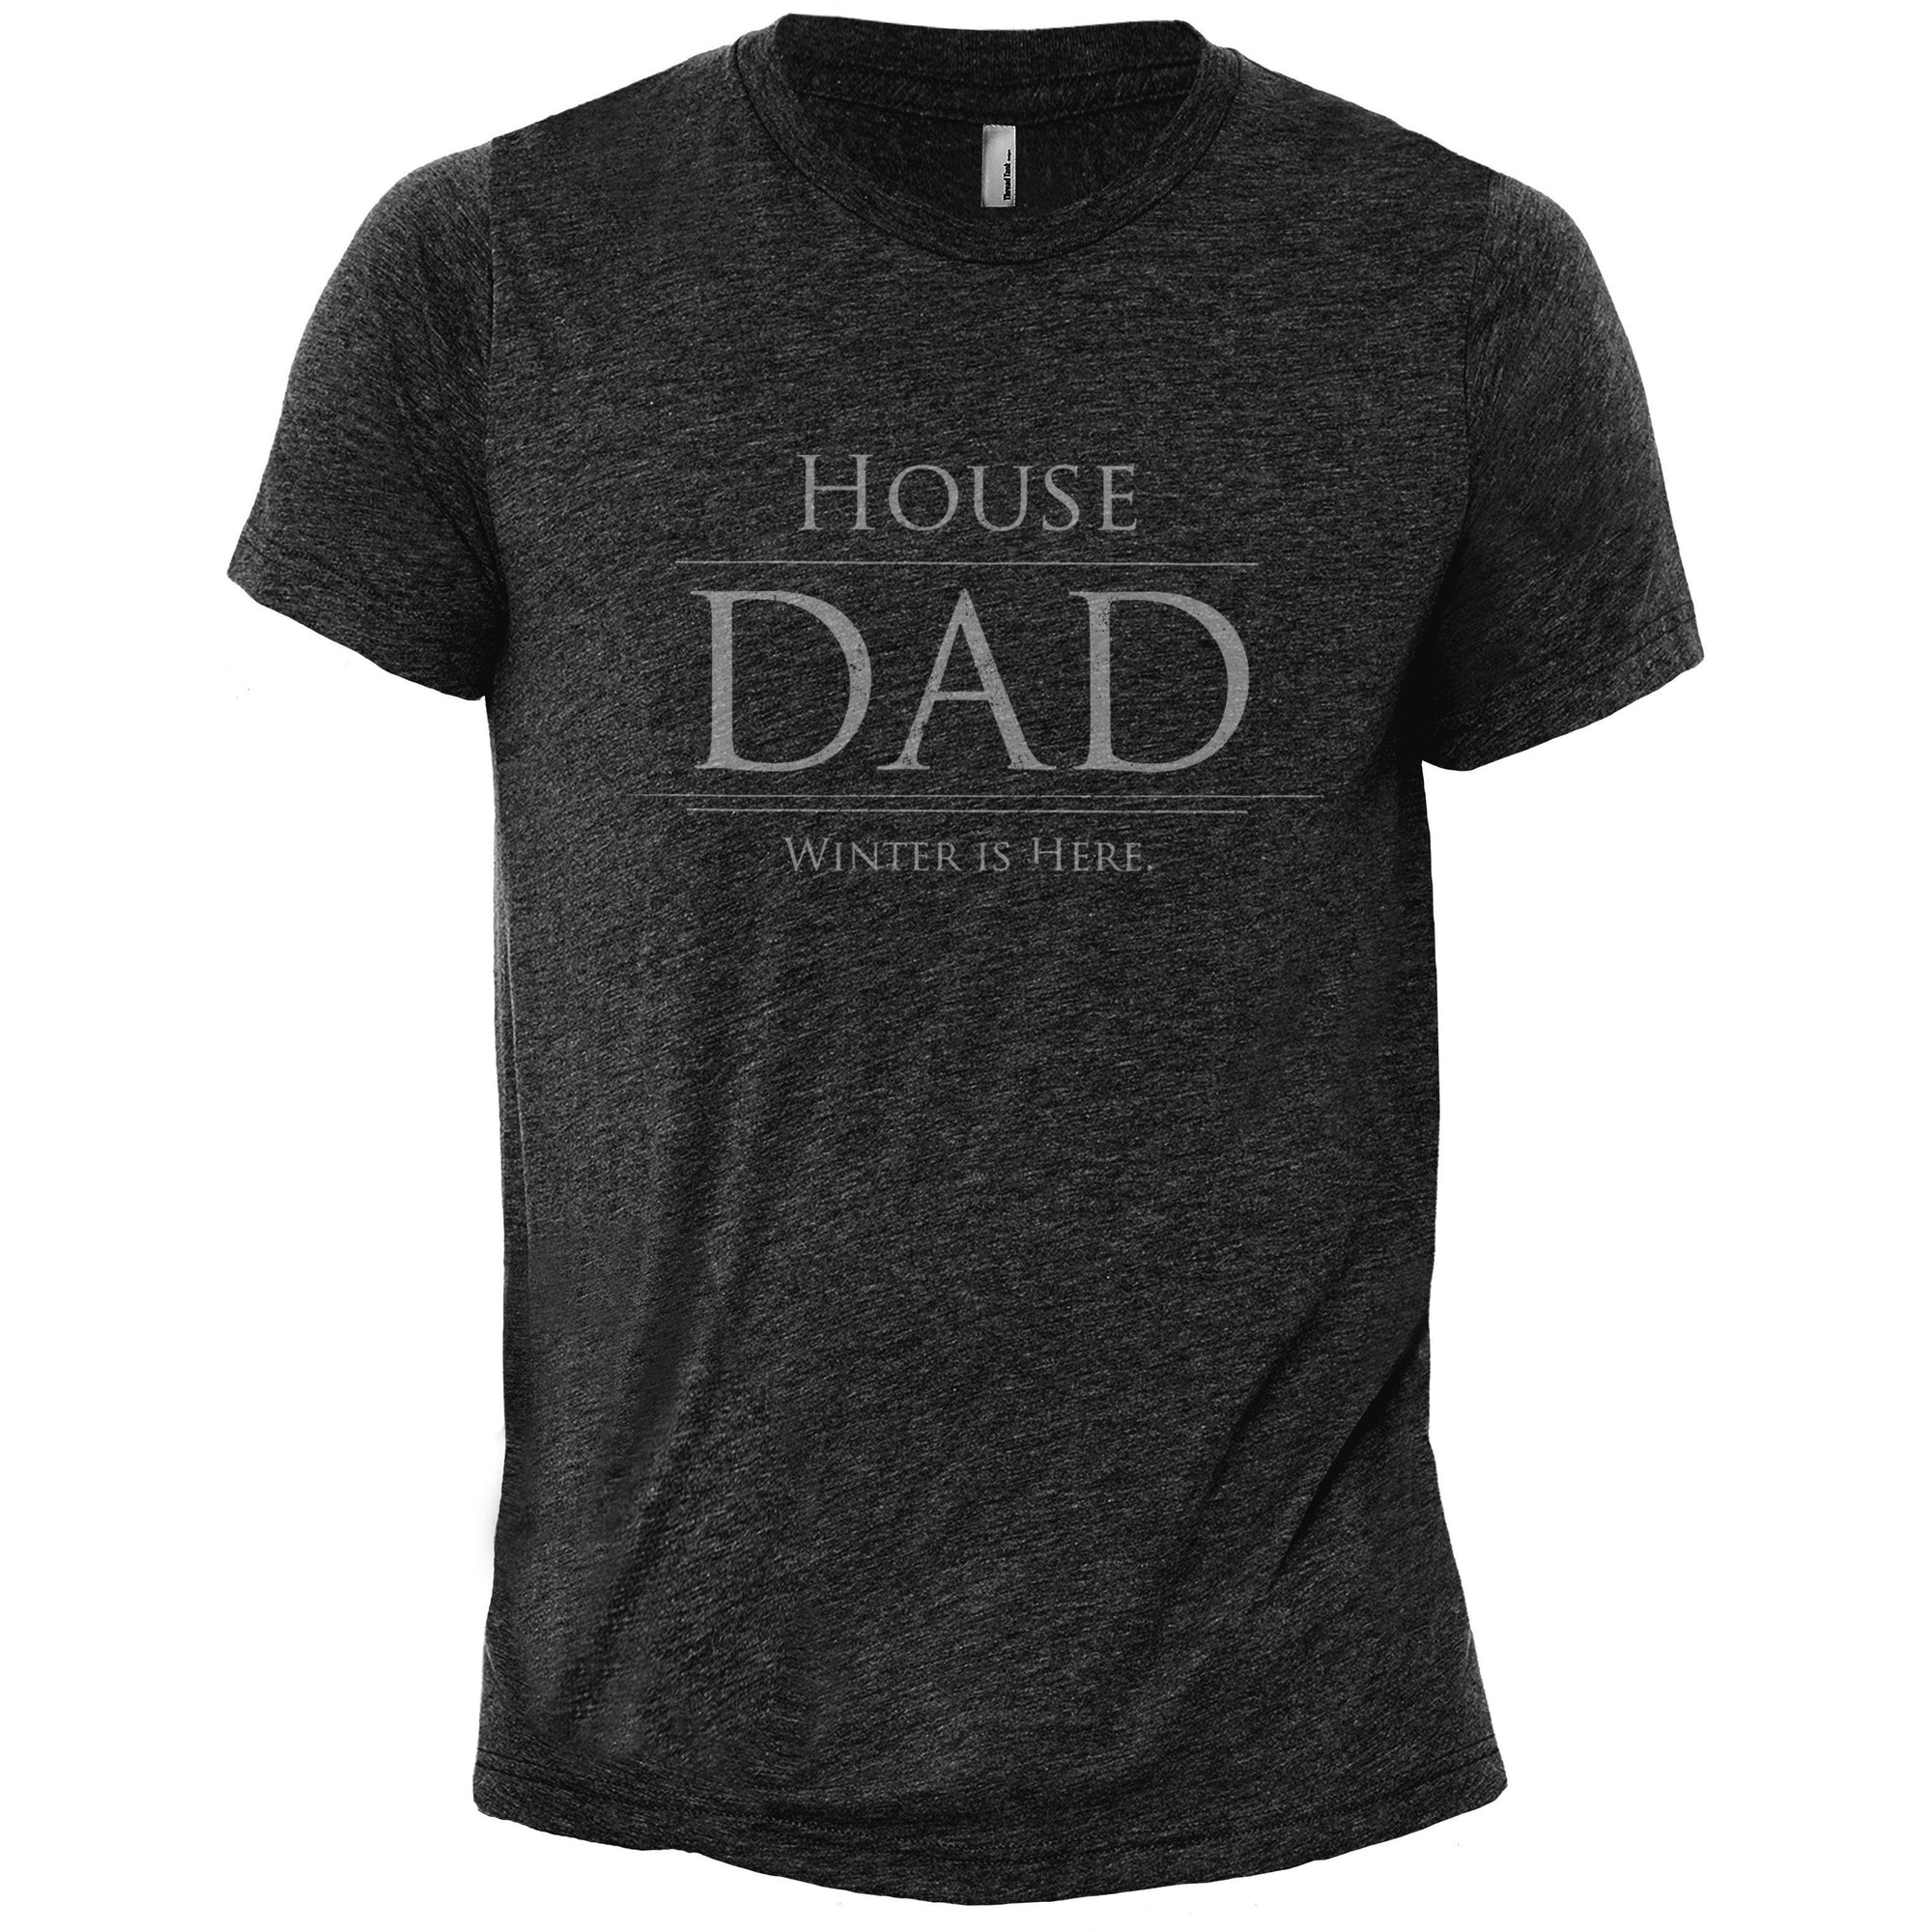 House Dad Winter Is Here Heather Grey Printed Graphic Men's Crew T-Shirt Tee